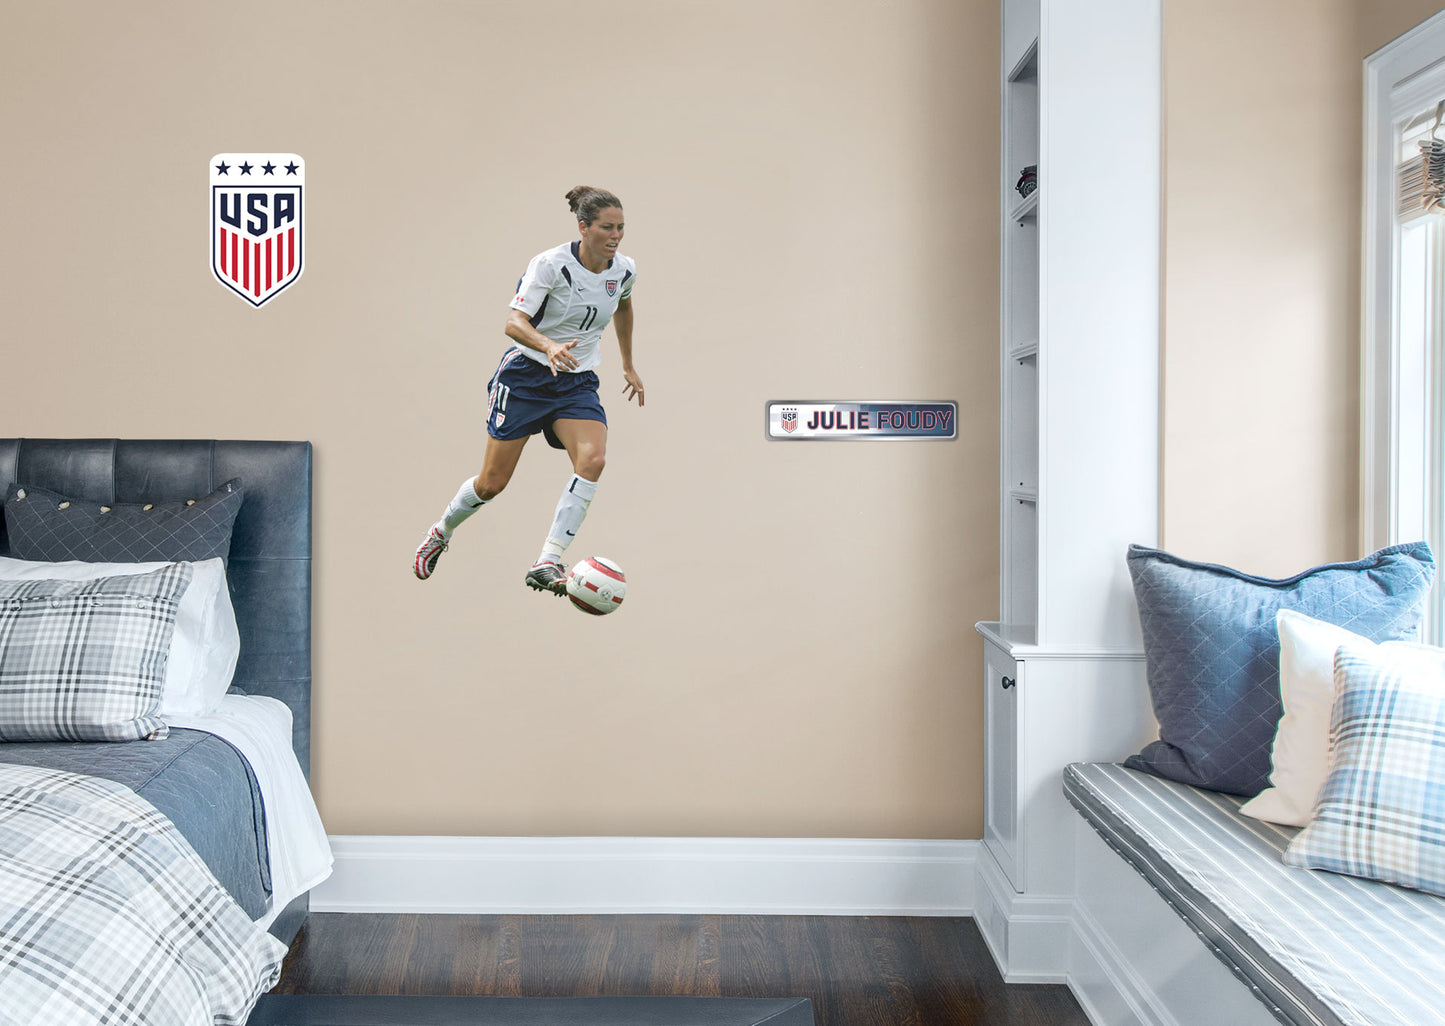 Julie Foudy RealBig        - Officially Licensed USWNT Removable Wall   Adhesive Decal